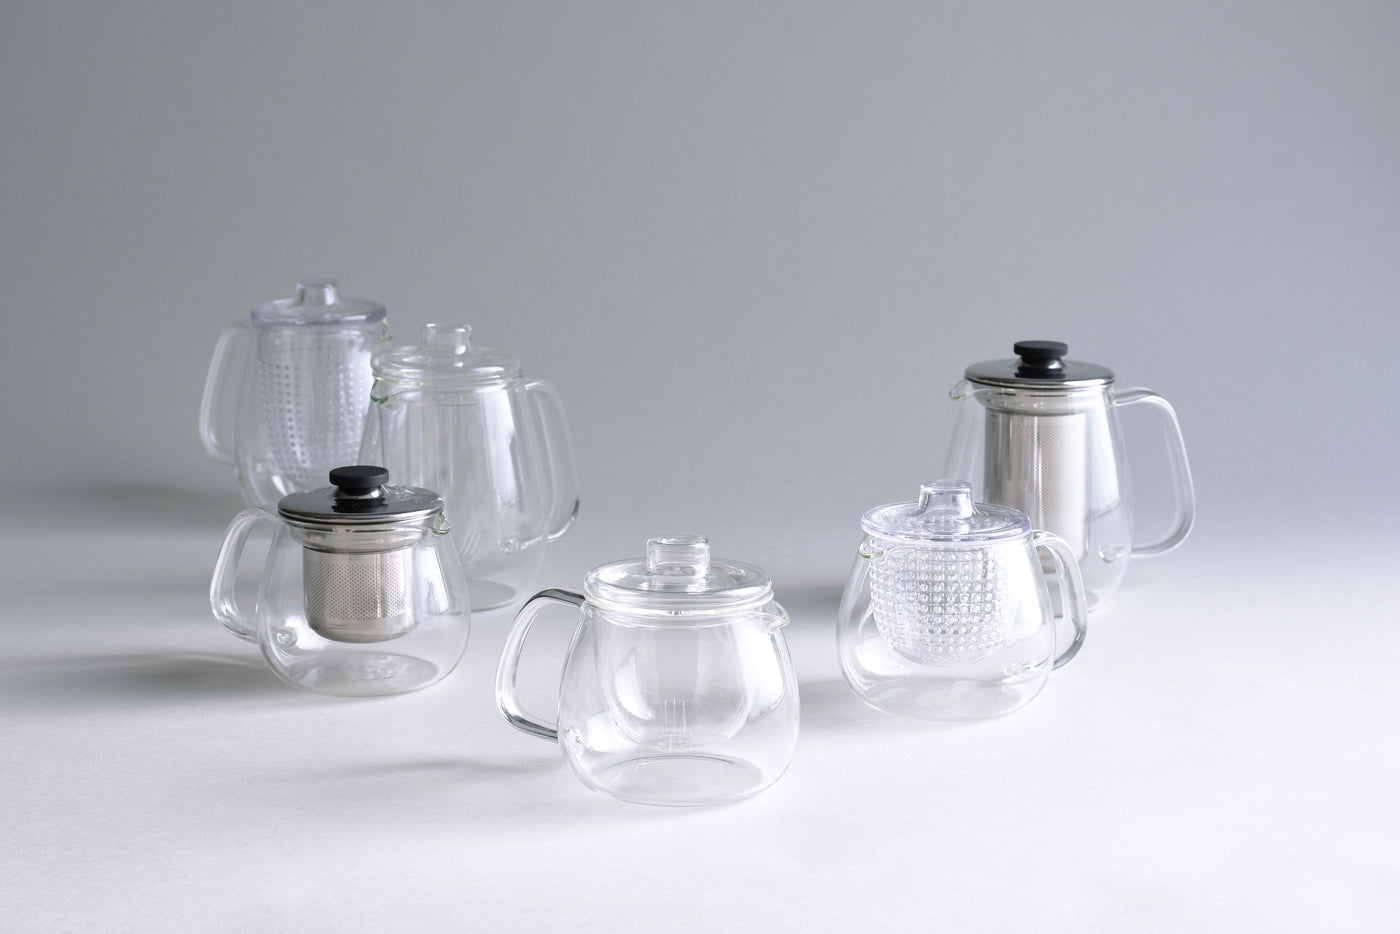 UNITEA teapot with a separate filter